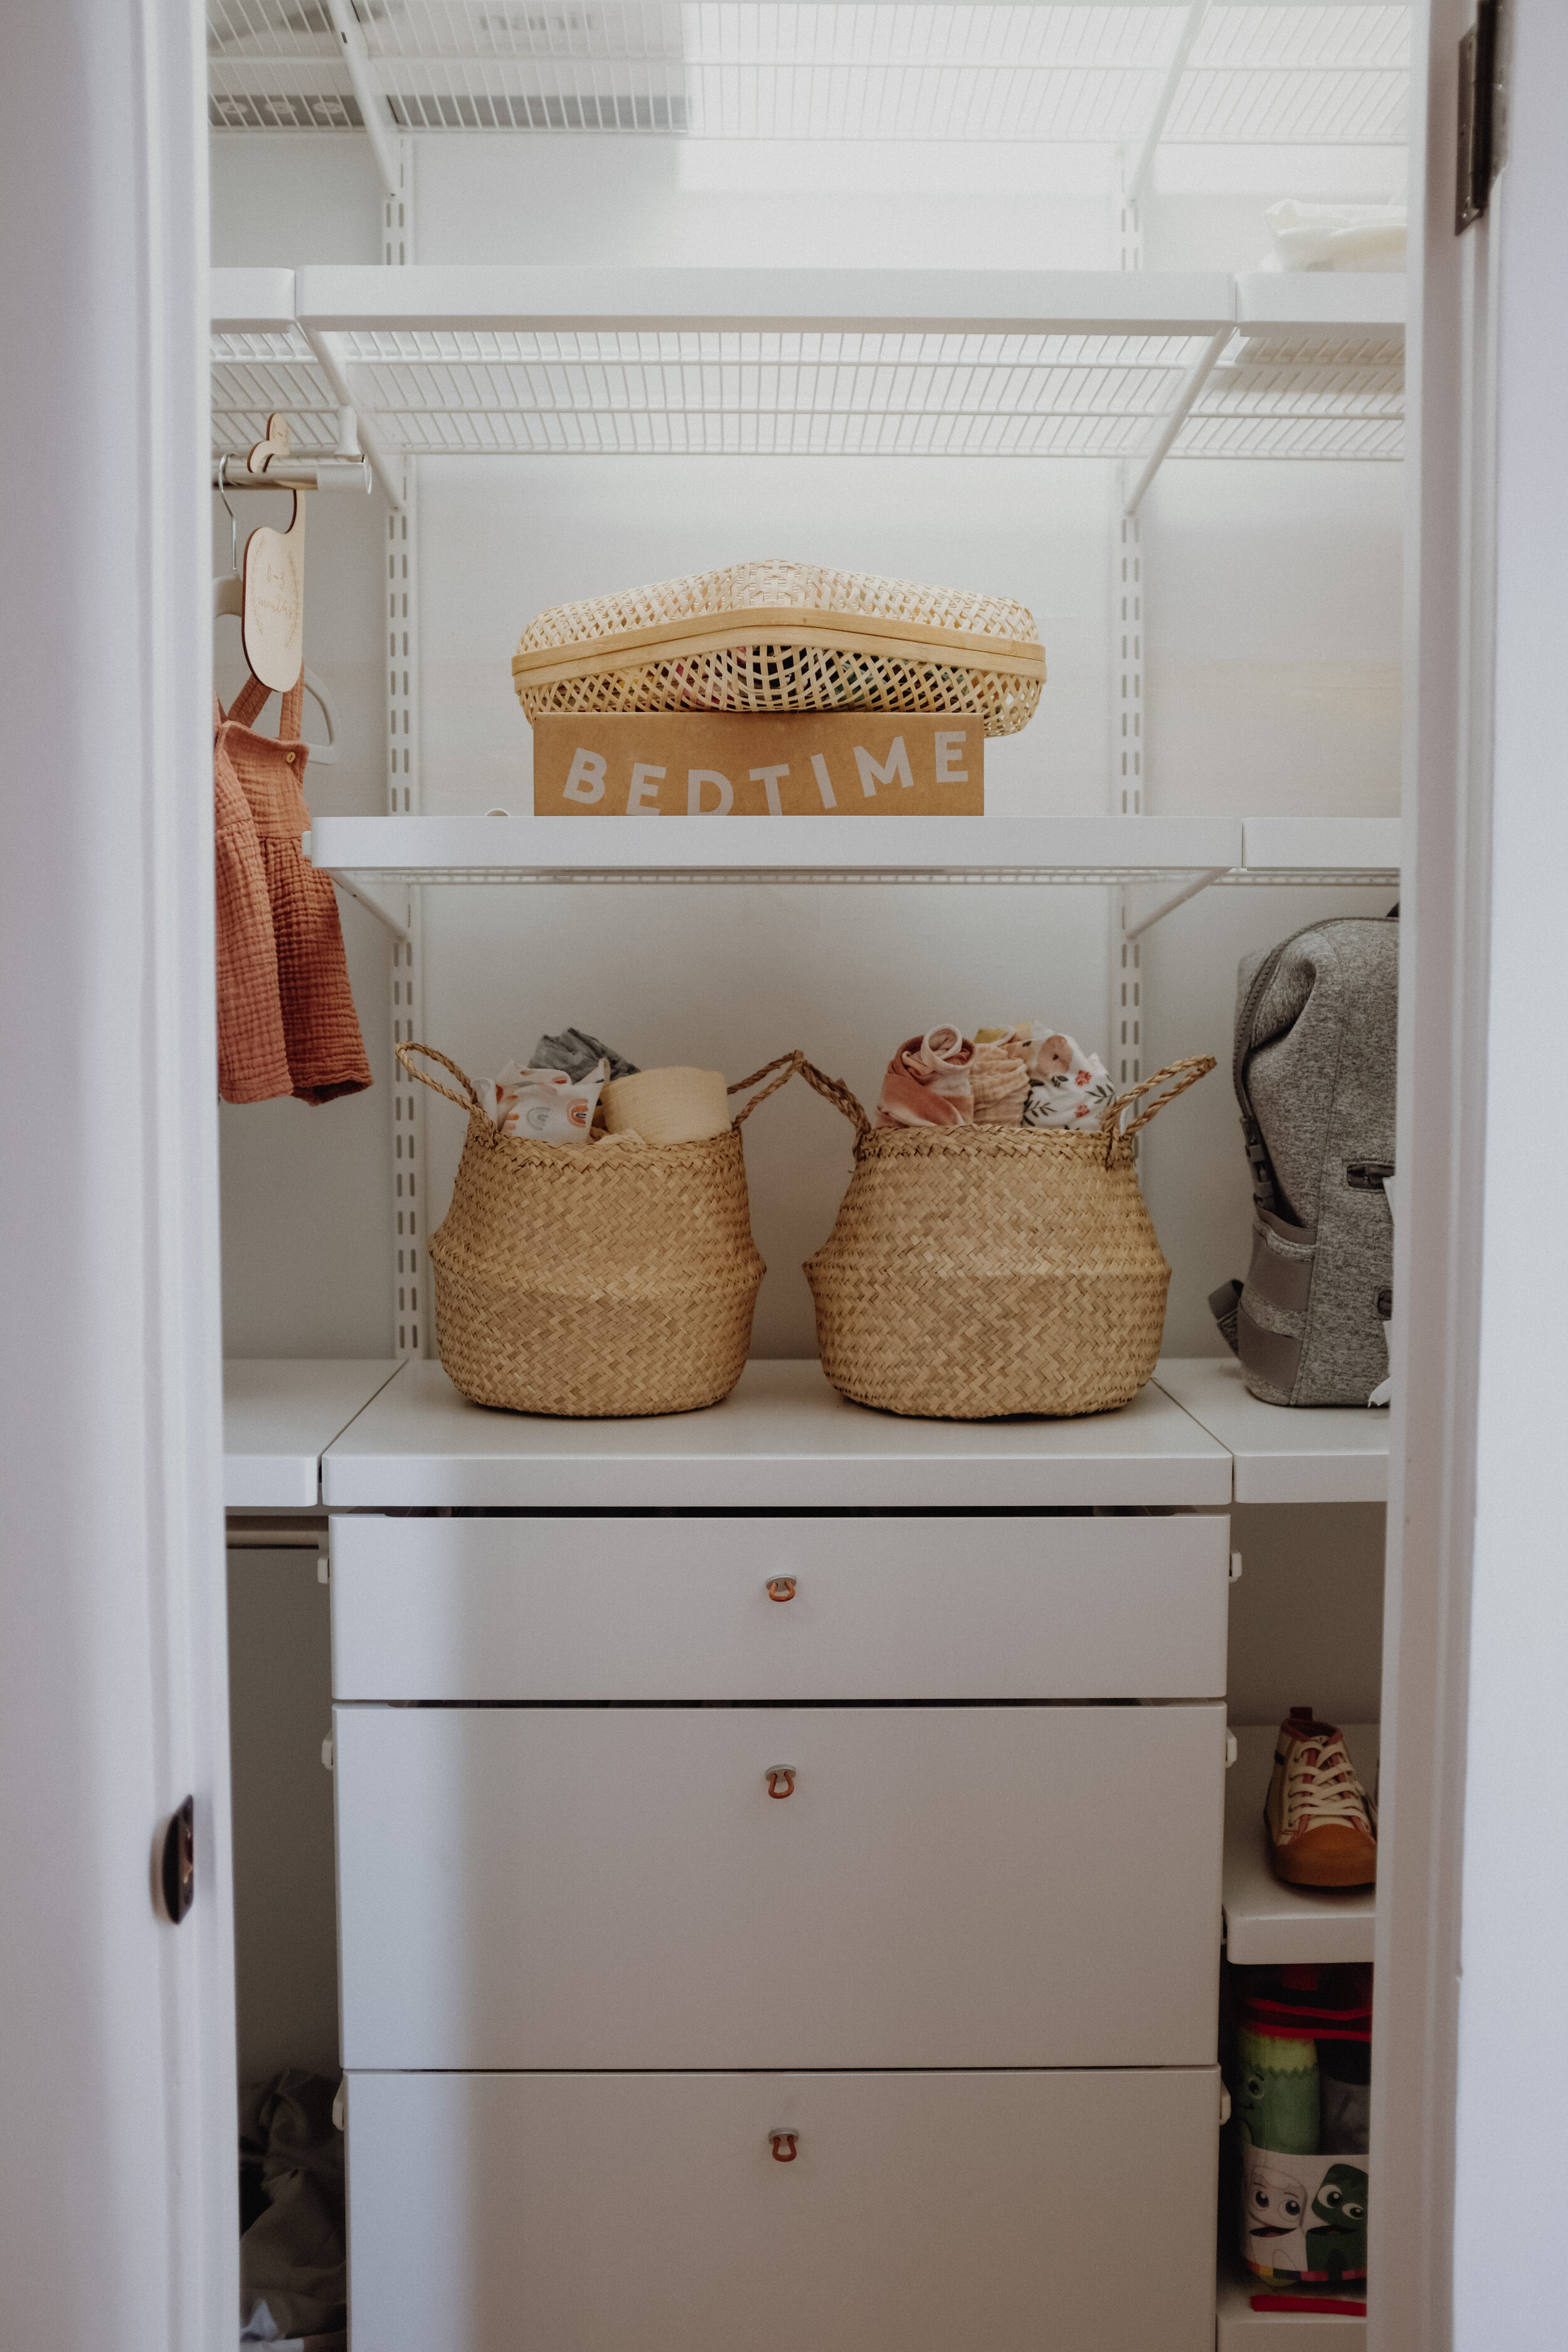 The Container Store Introduces New Additions to elfa Custom Closet